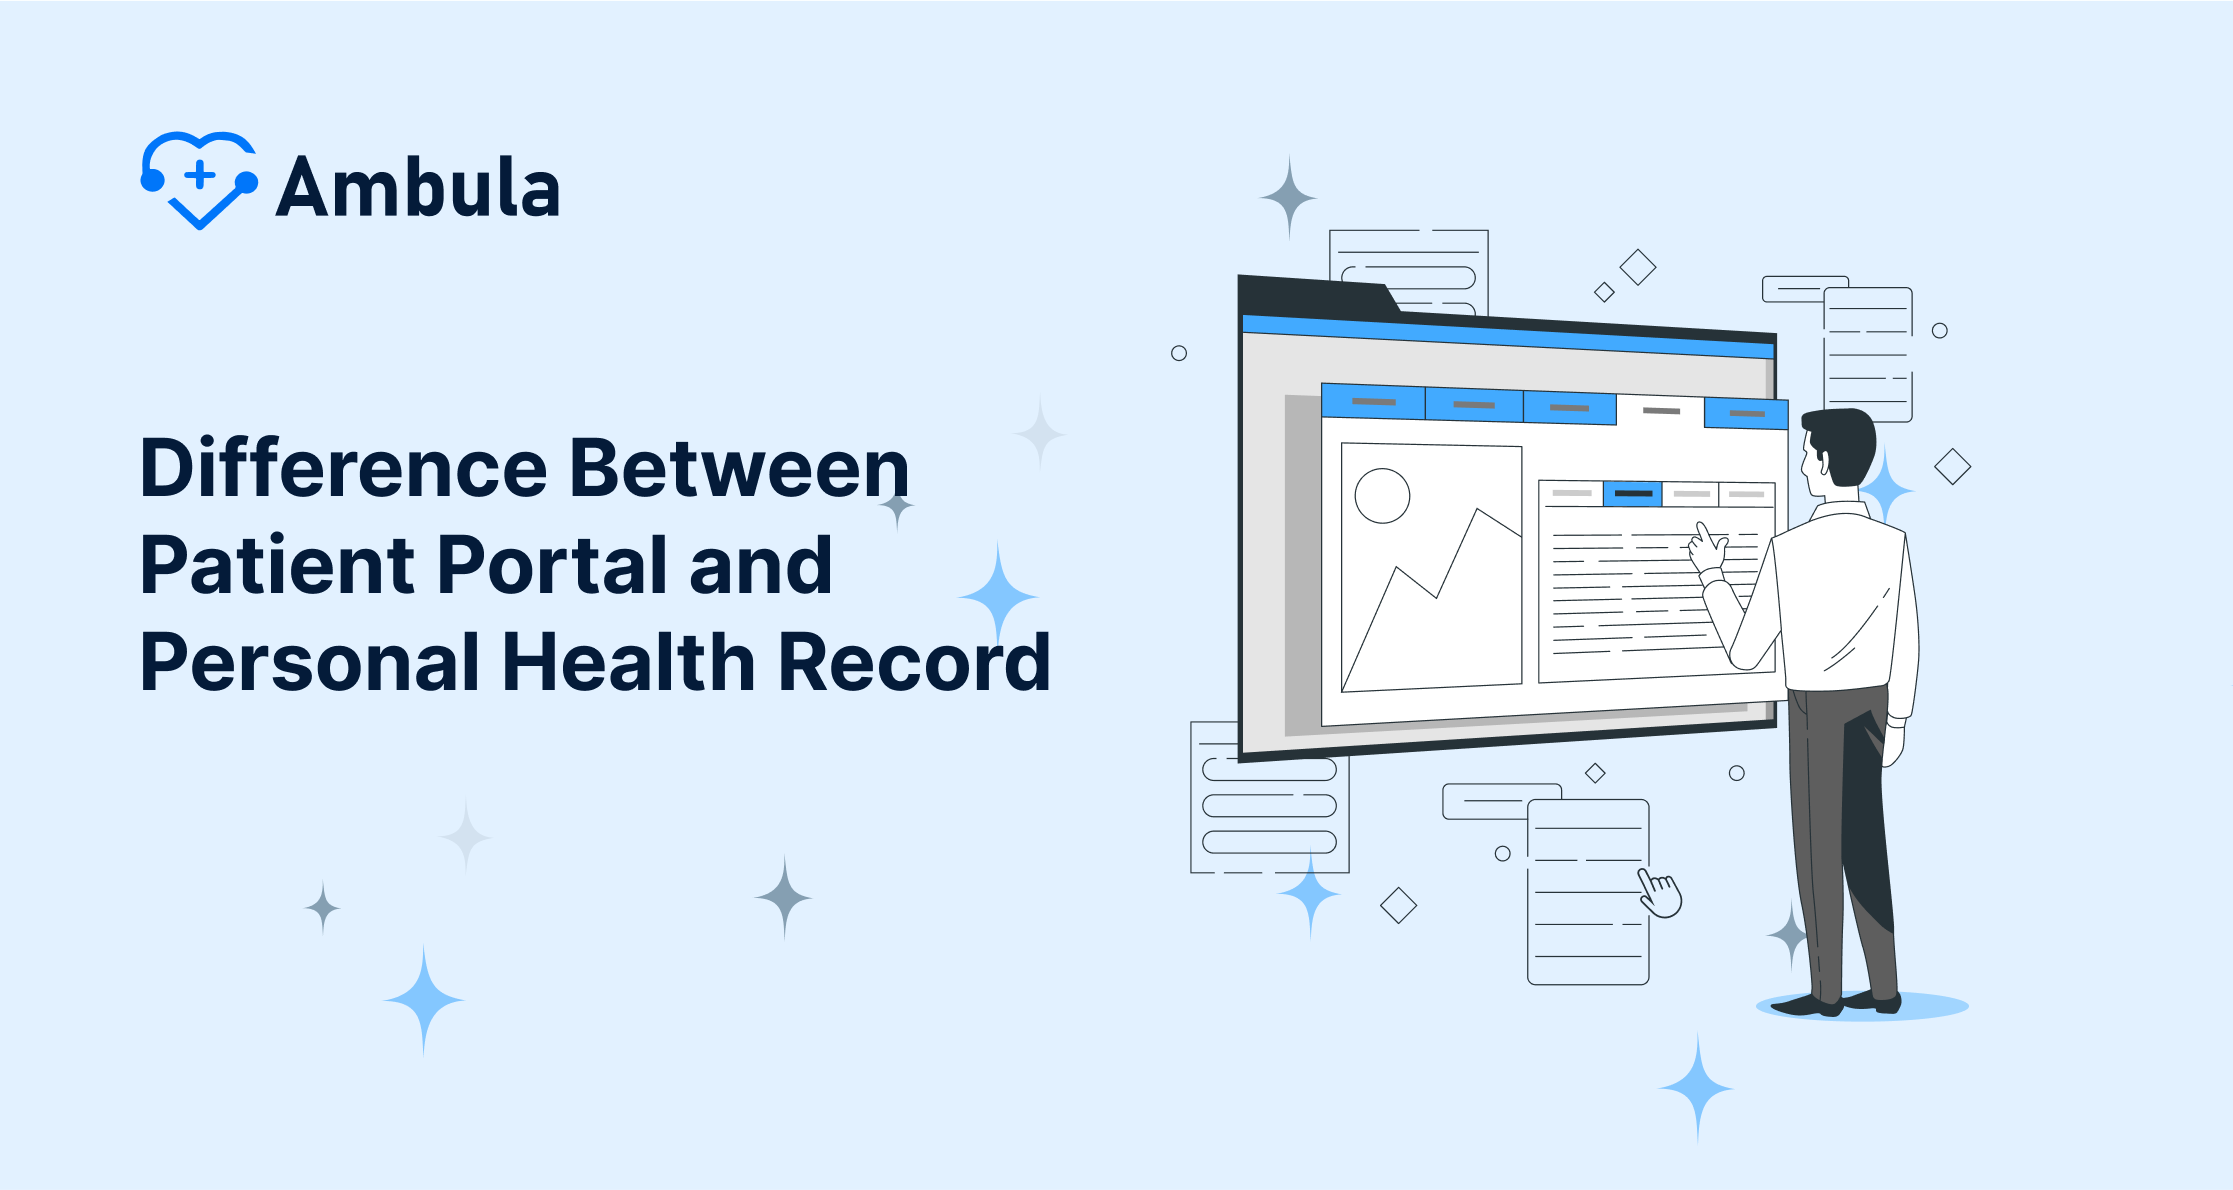 Difference Between Patient Portal and Personal Health Record